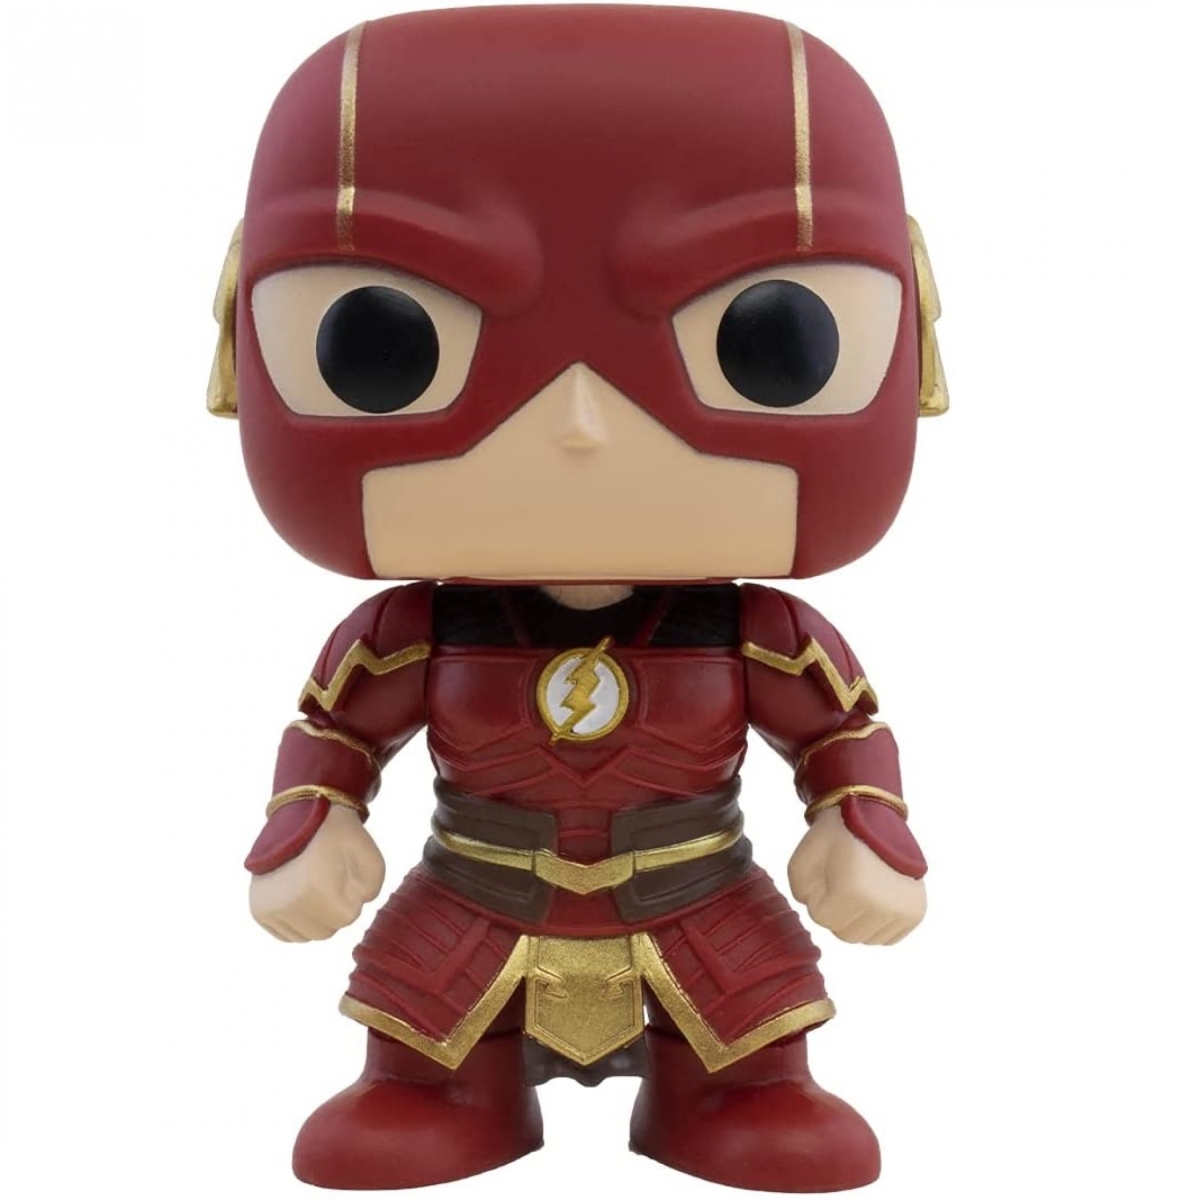 Picture of Flash 833186 The Flash DC Comics Imperial Palace Funko Pop Vinyl Figure